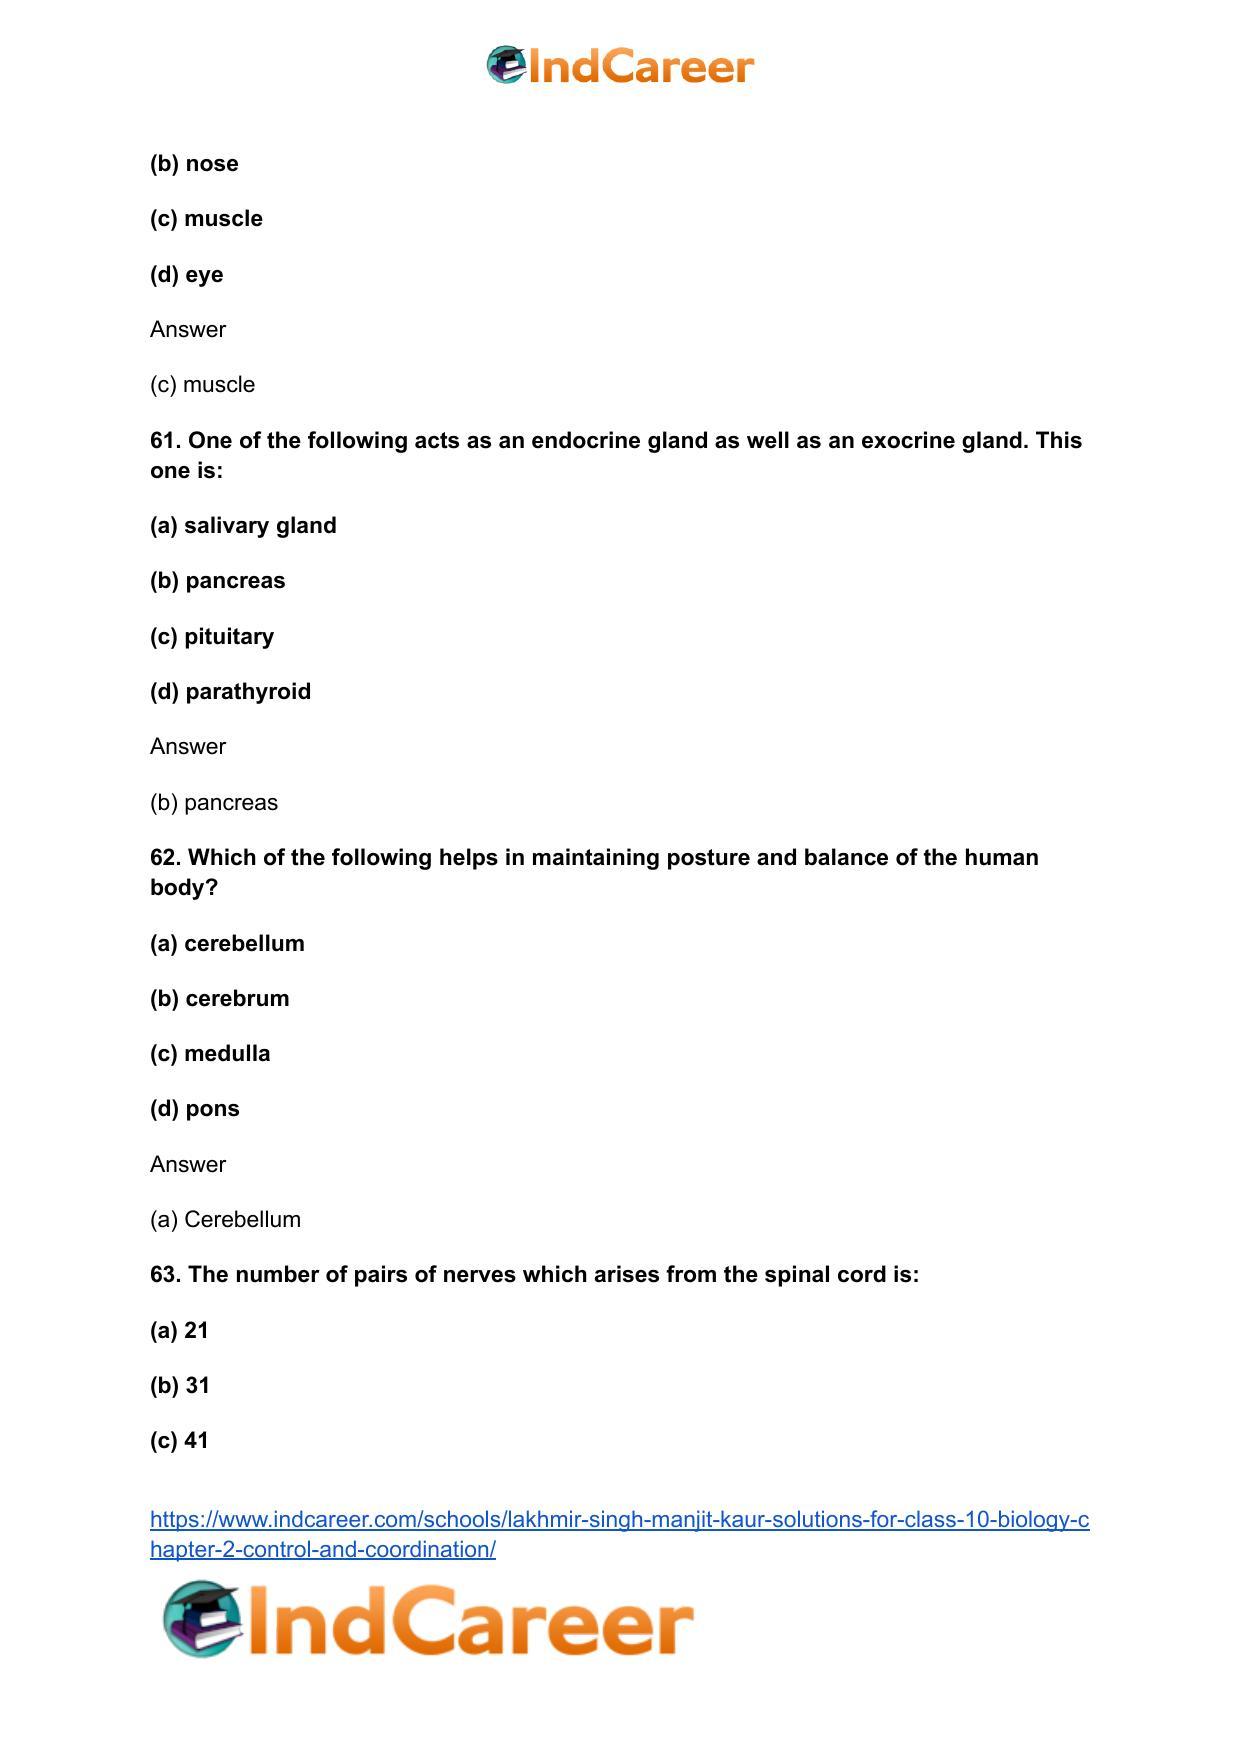 Lakhmir Singh Manjit Kaur  Solutions for Class 10 Biology: Chapter 2- Control And Coordination - Page 49